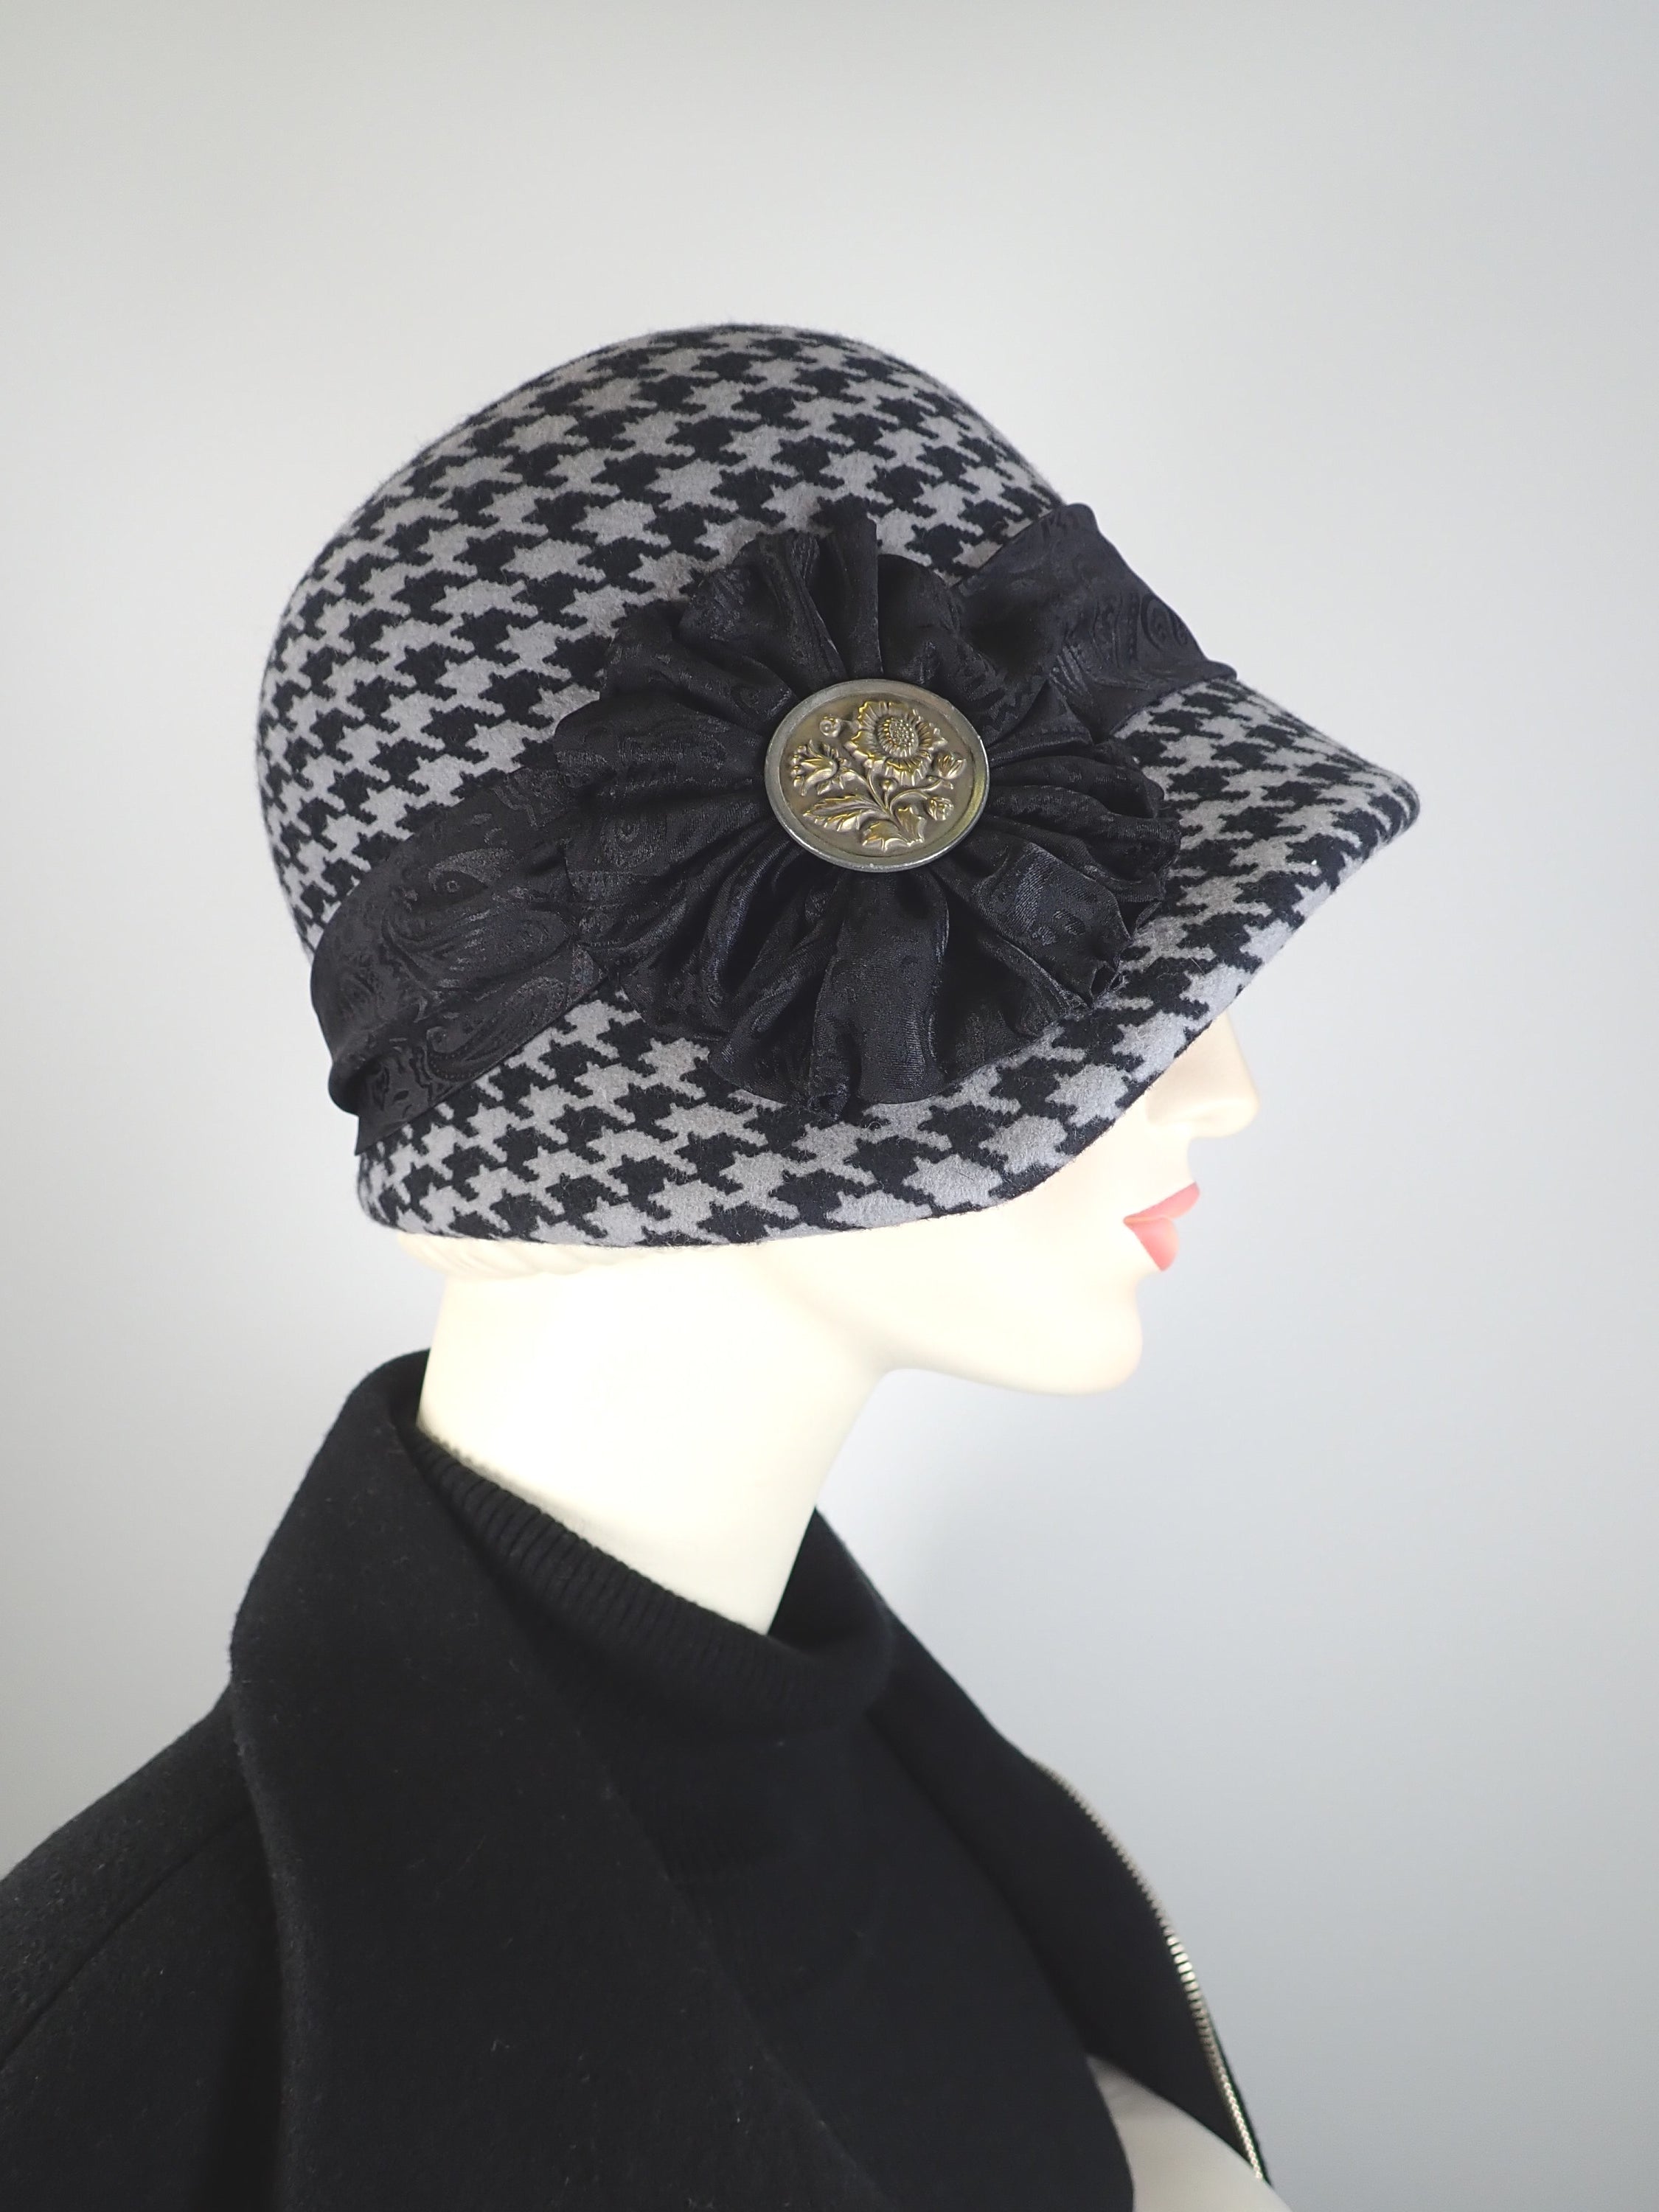 Womens black and gray hounds tooth winter cloche felt hat. 1920s style Hat. Downton Abbey hat. Ladies stylish flapper cloche.